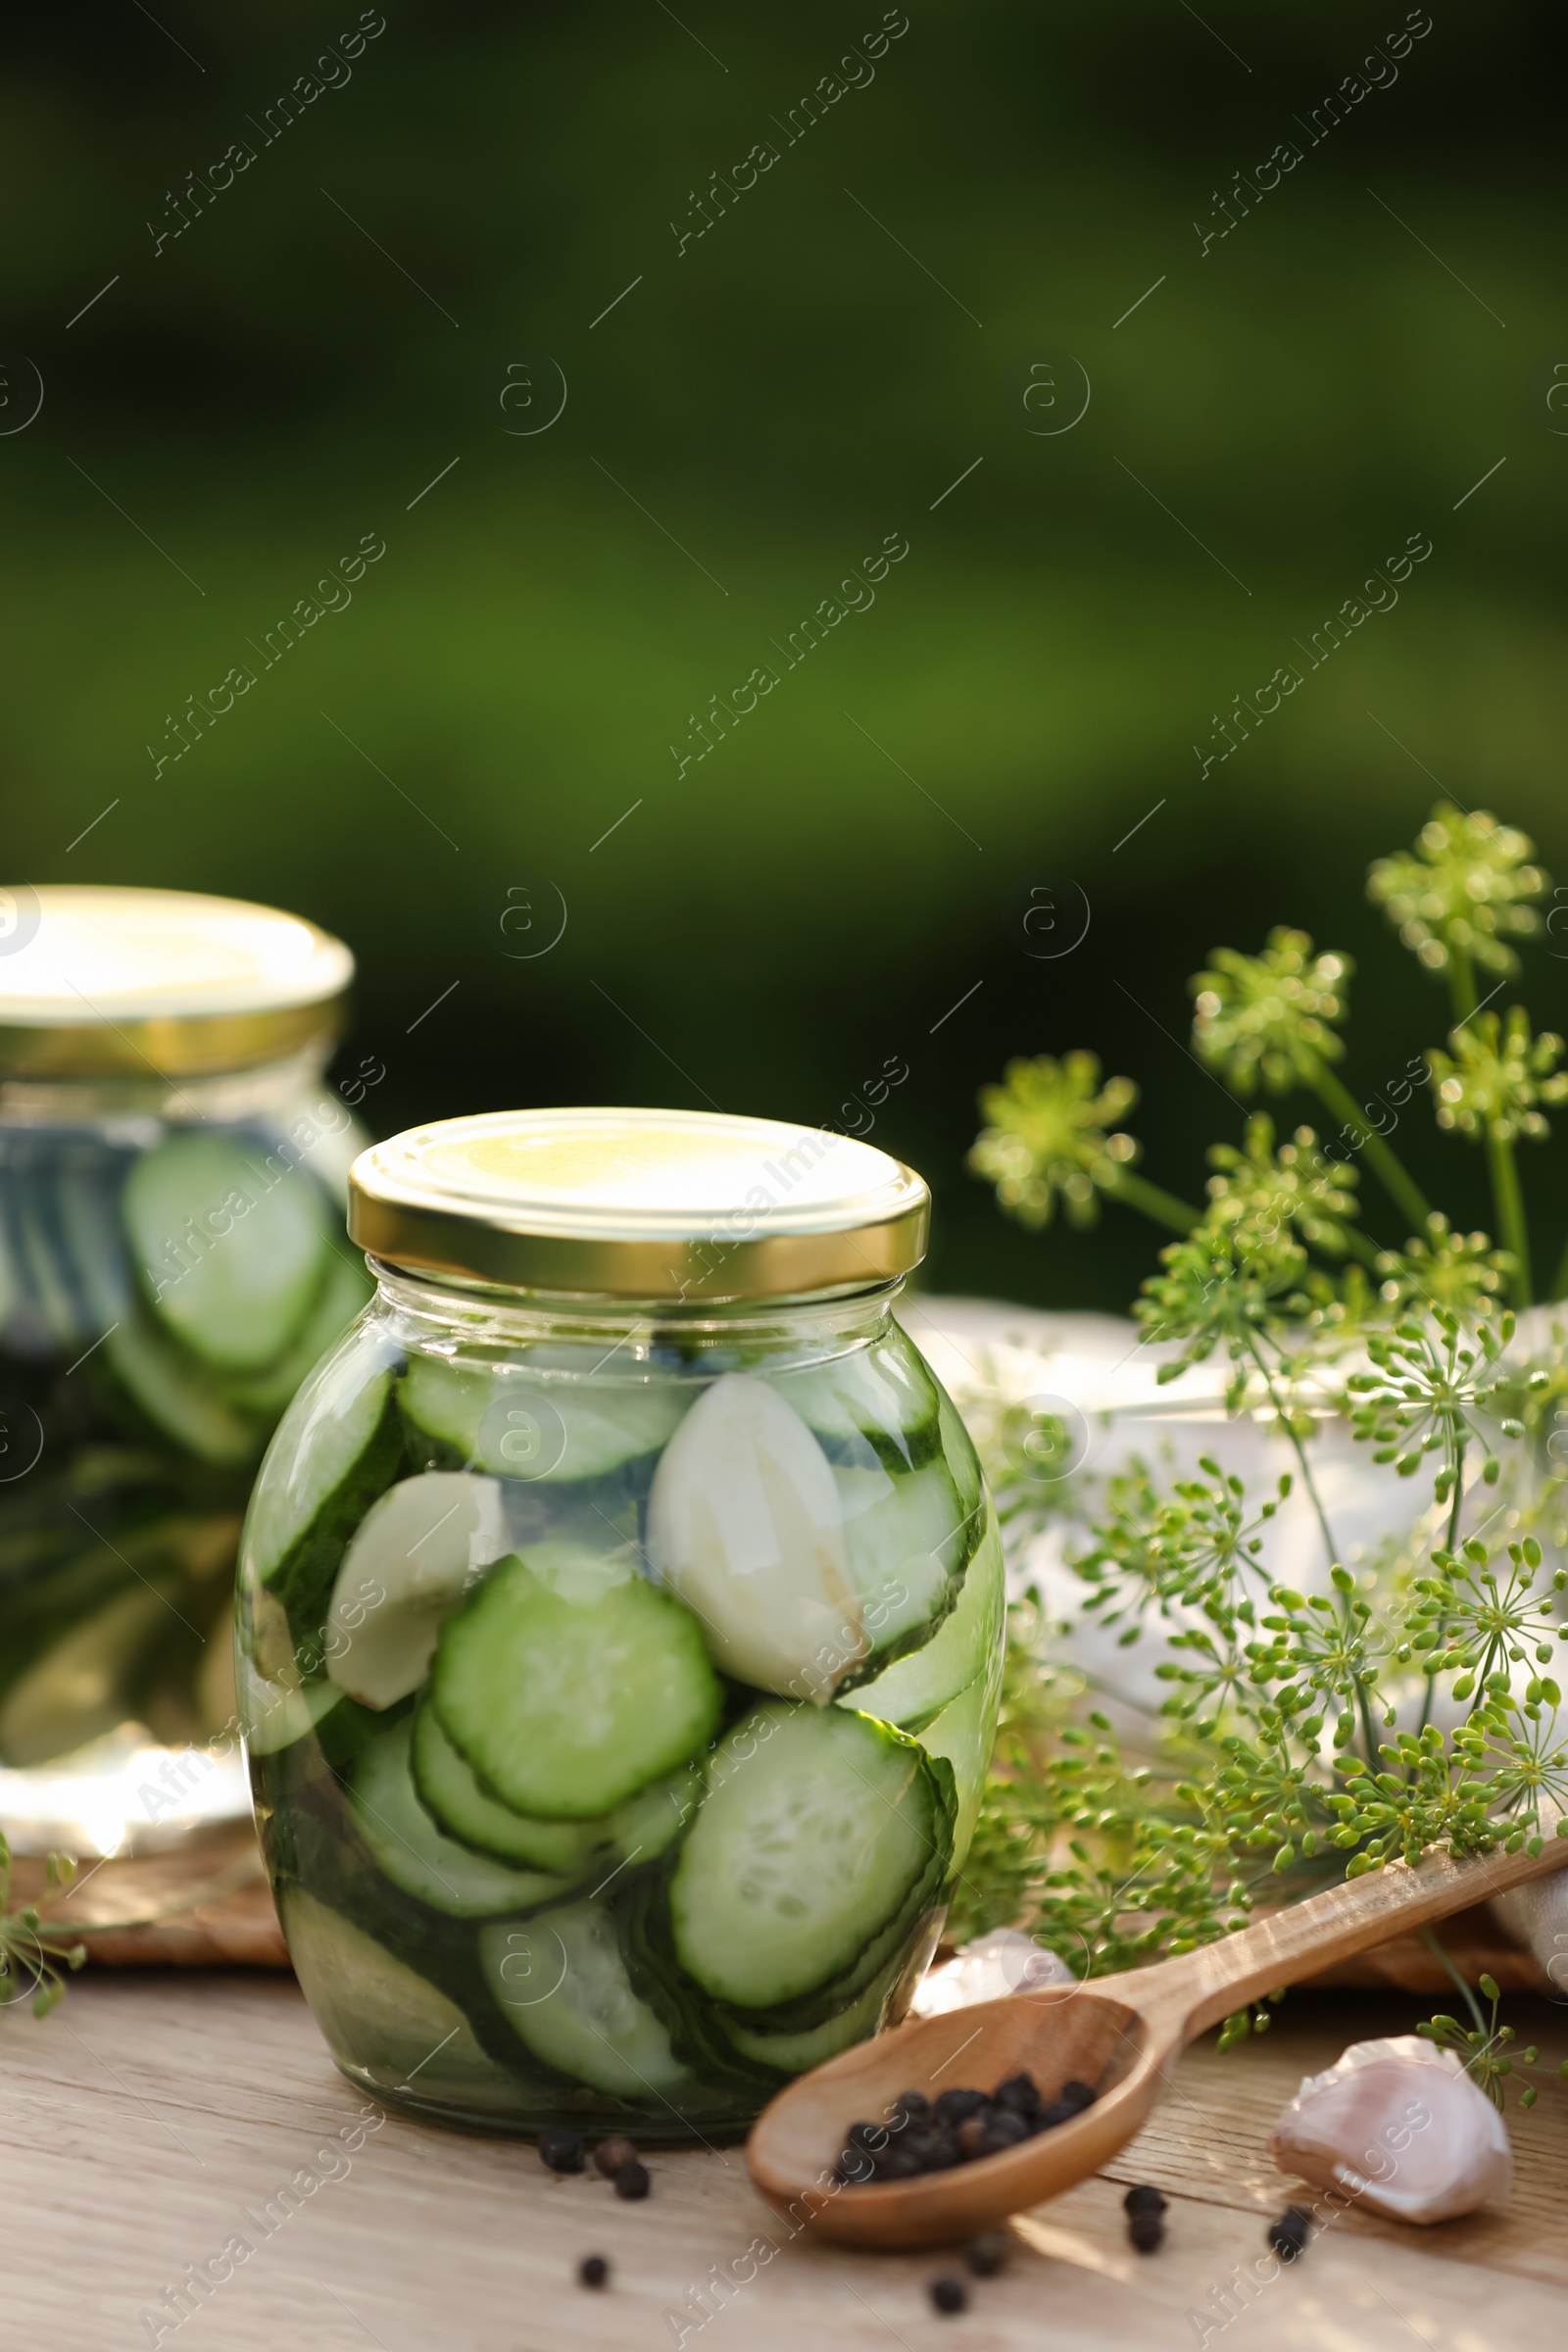 Photo of Jars of delicious pickled cucumbers and ingredients on wooden table against blurred background